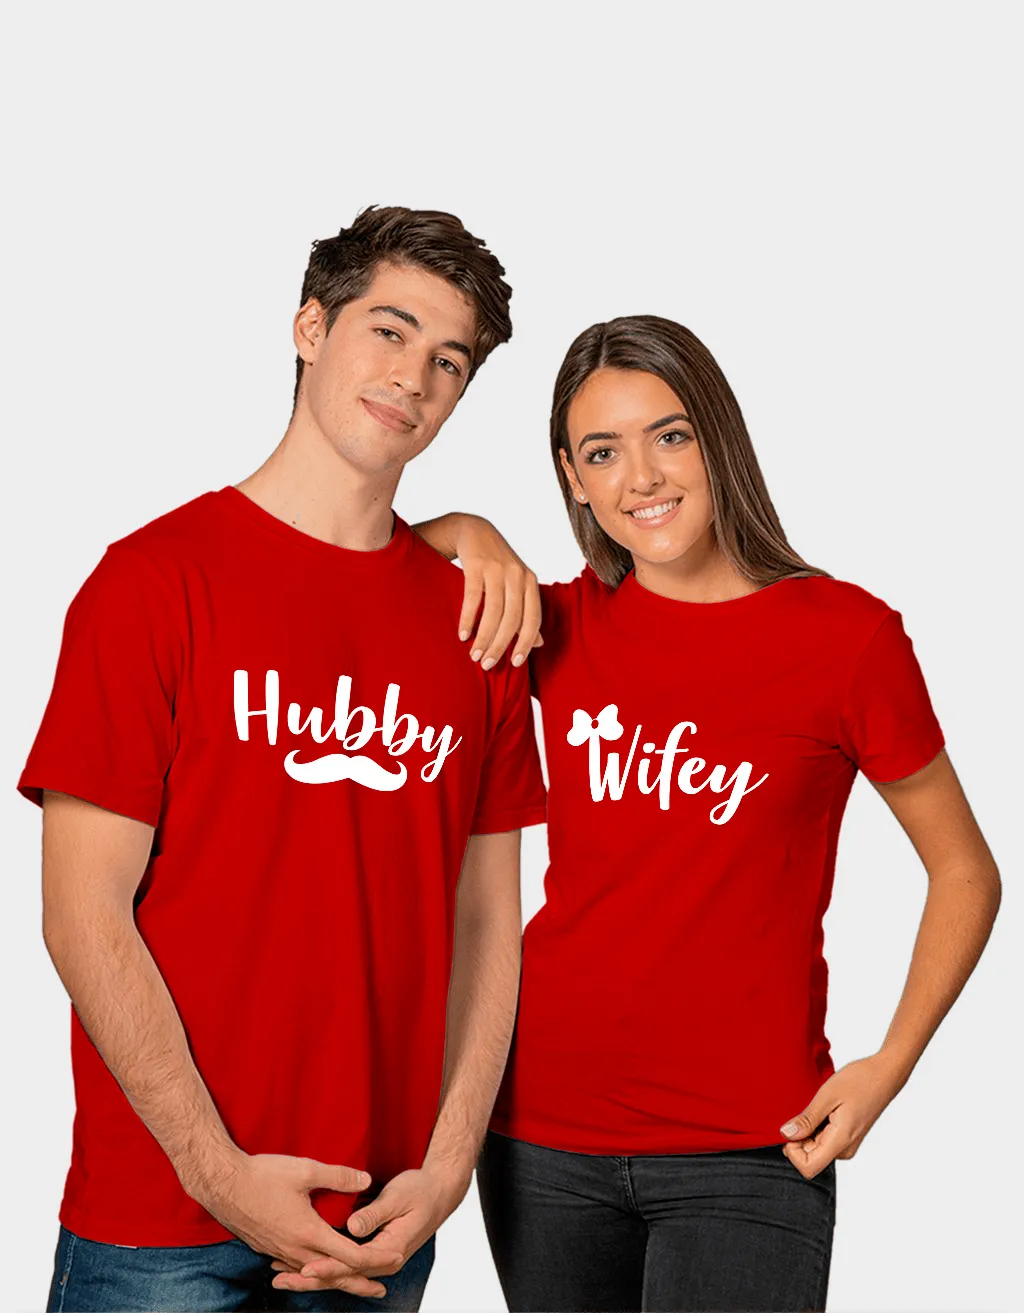 hubby wifey t shirts for couple red couple tshirt online india